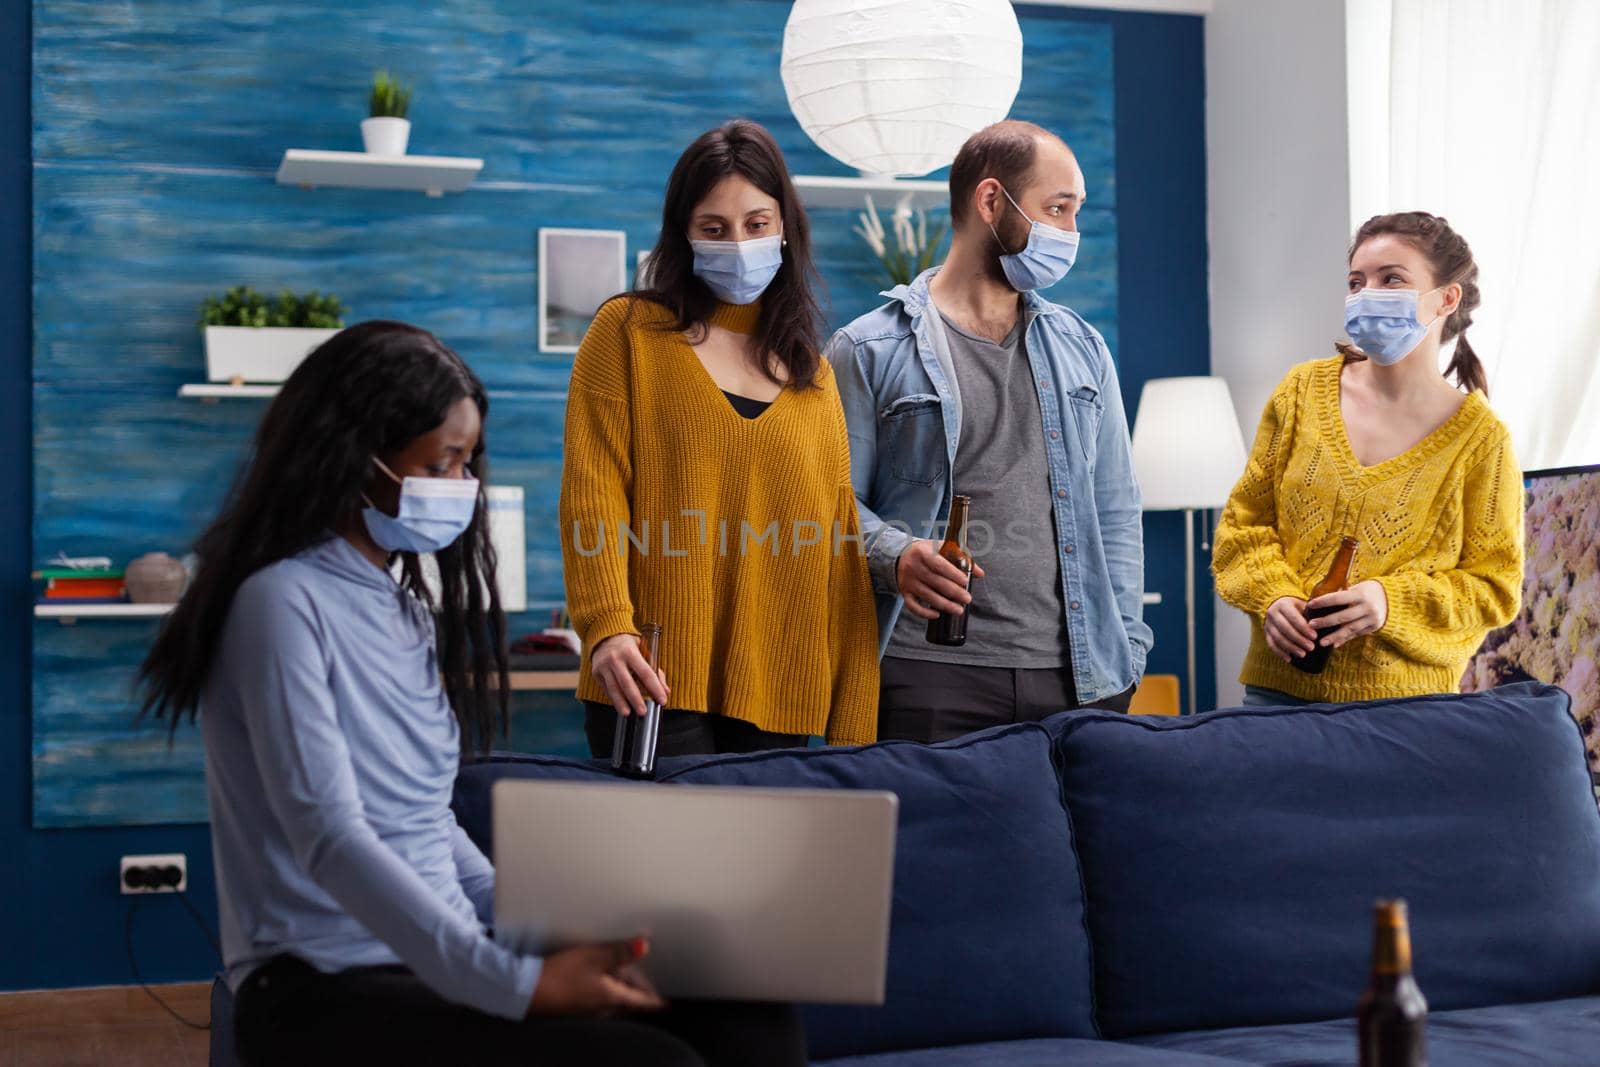 Multi ethnic friends wearing face mask drinking beer using laptop keeping social distancing to prevent coronavirus spread during global pandemic having fun in home living room. Conceptual image.